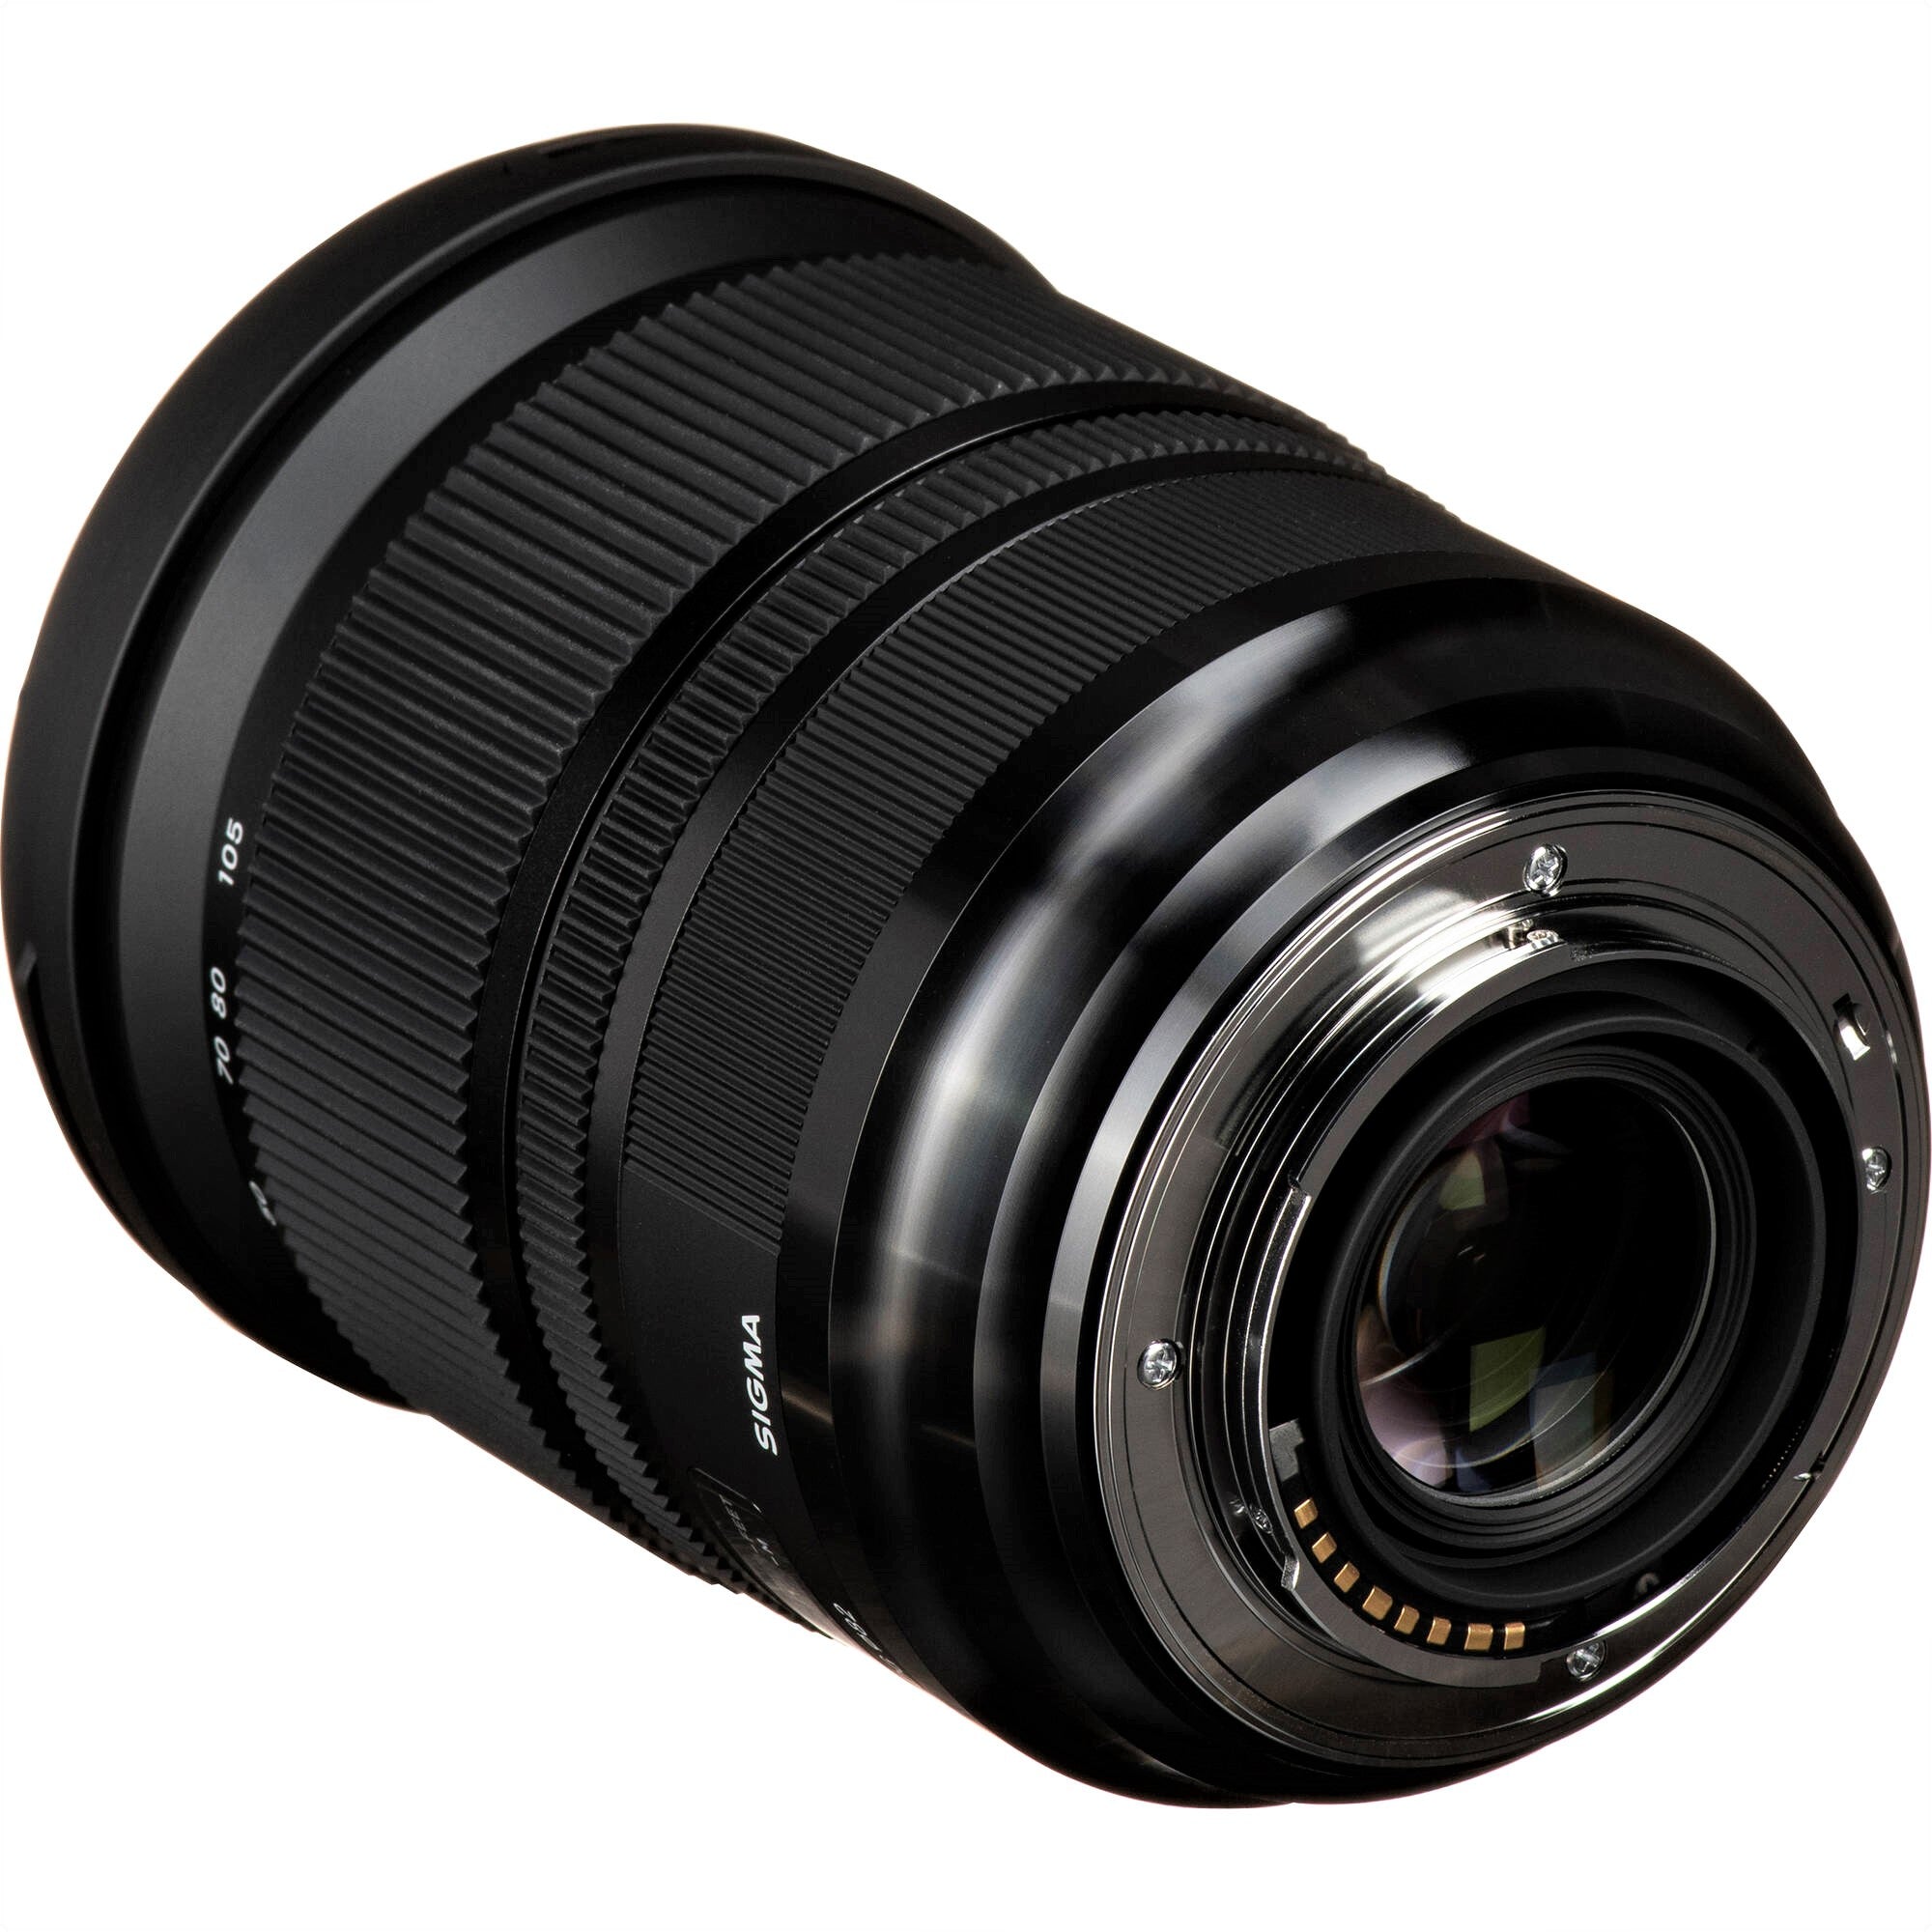 Sigma 24-105mm F4.0 DG OS HSM Art Lens (Sony A) in a Back-Side View